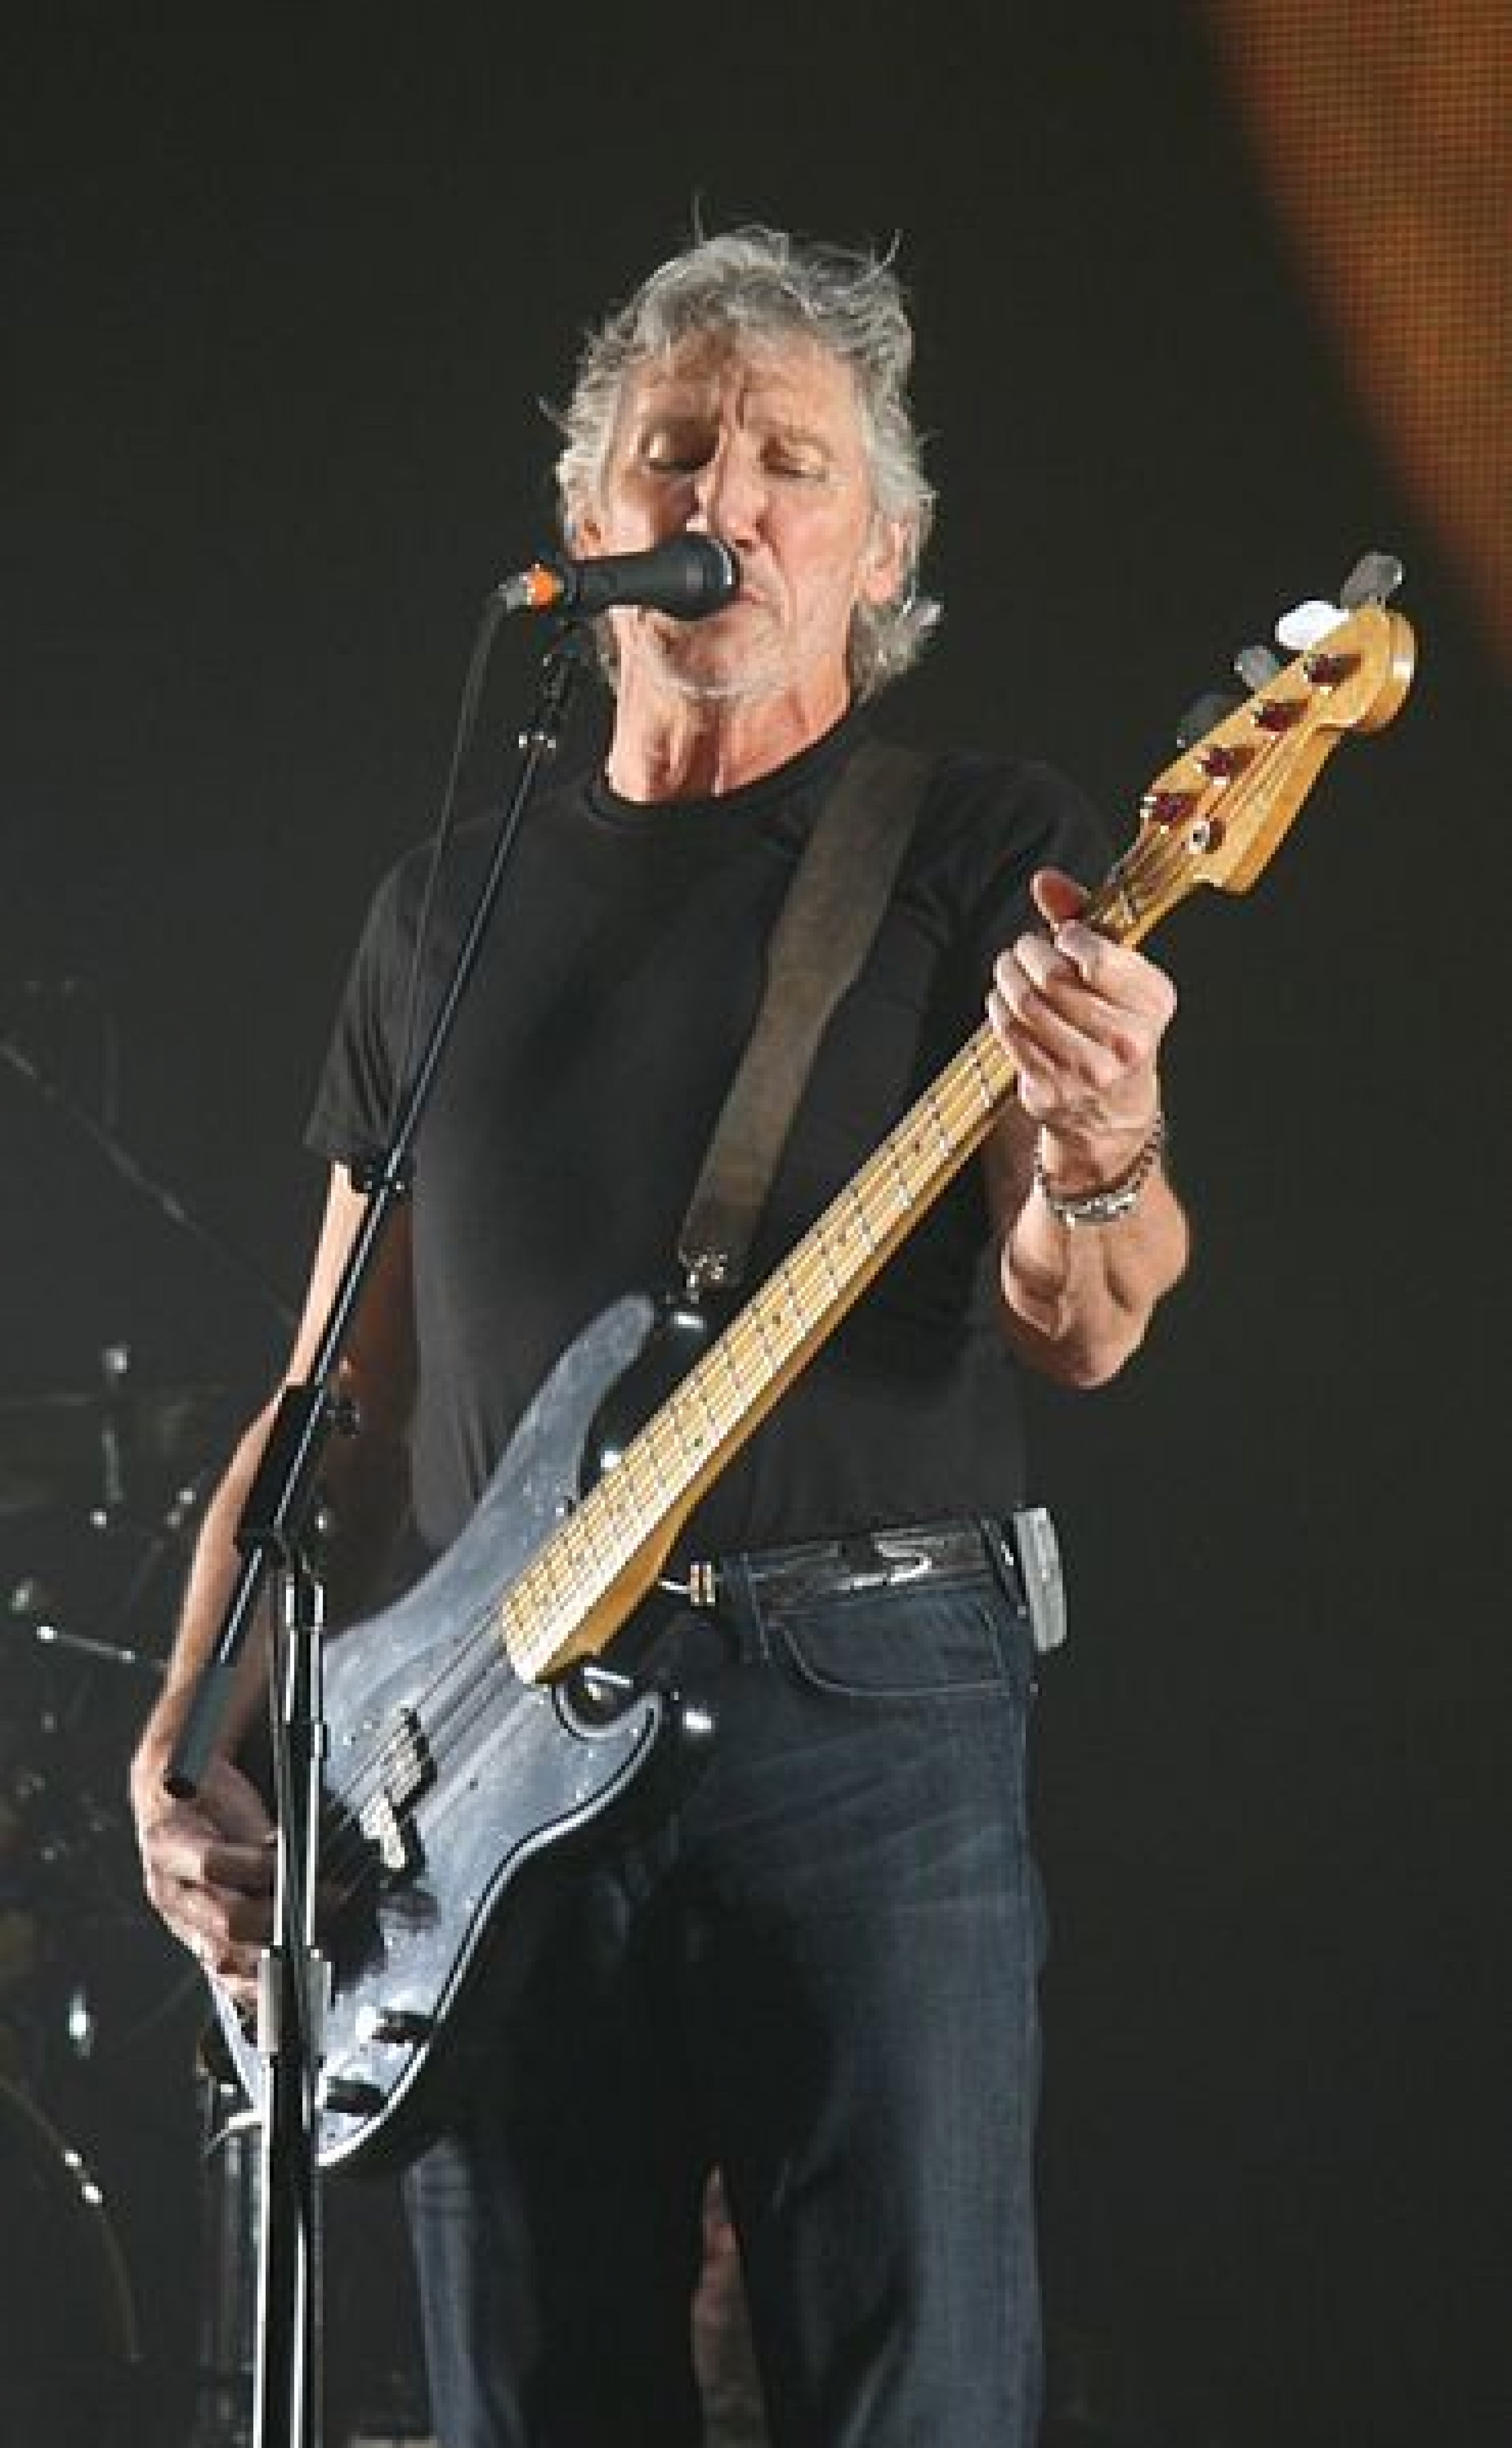 2. Roger Waters 88 million